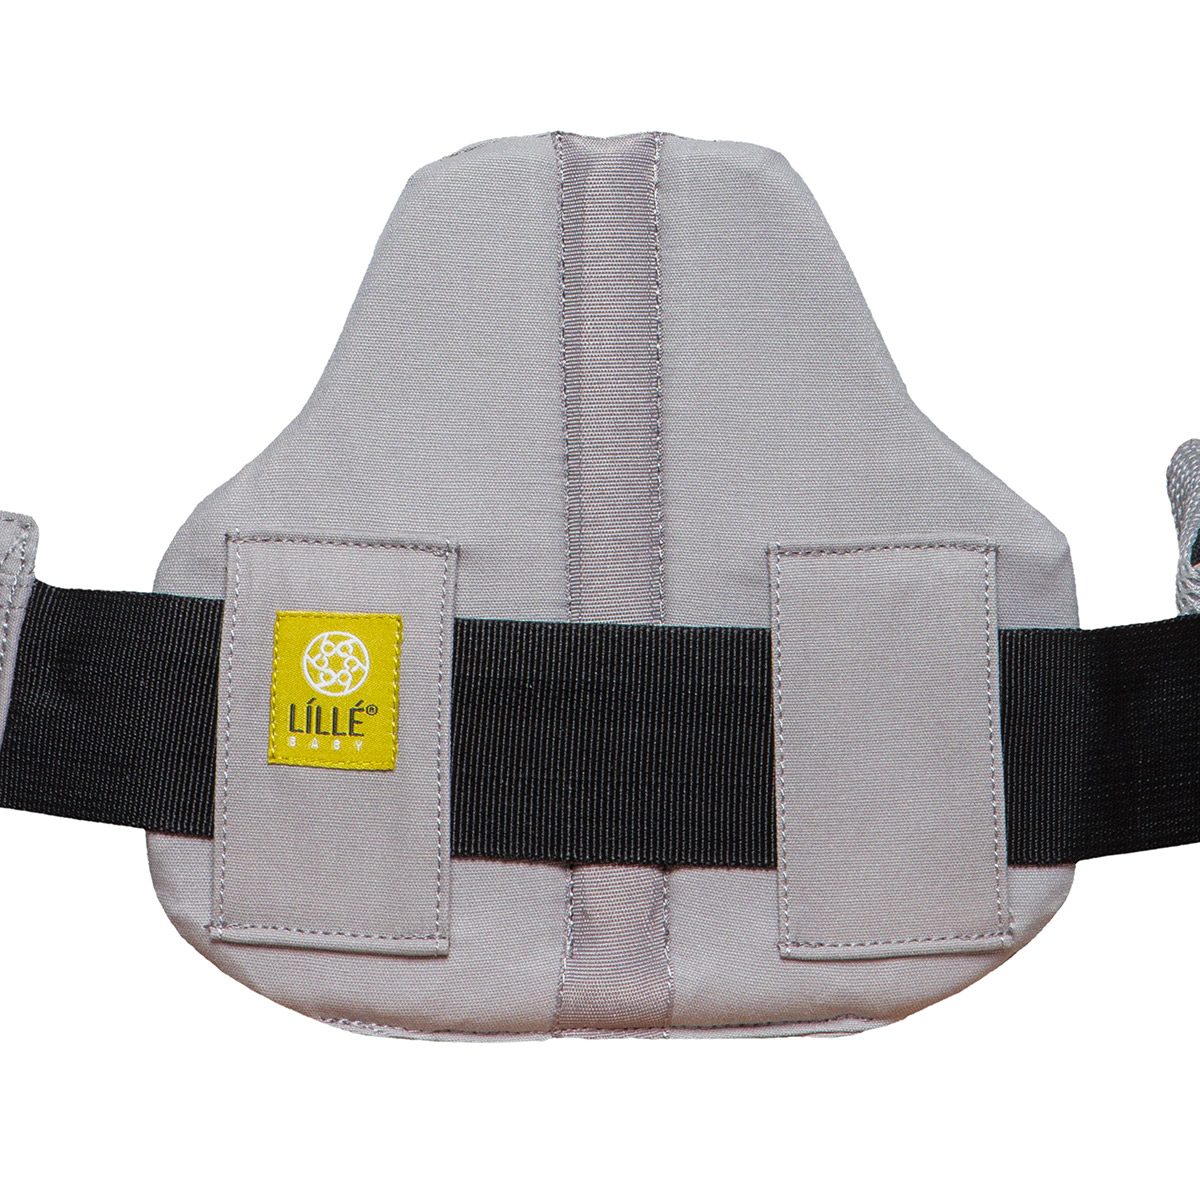 LILLEbaby Airflow Baby Carrier - Mist - image 2 of 5